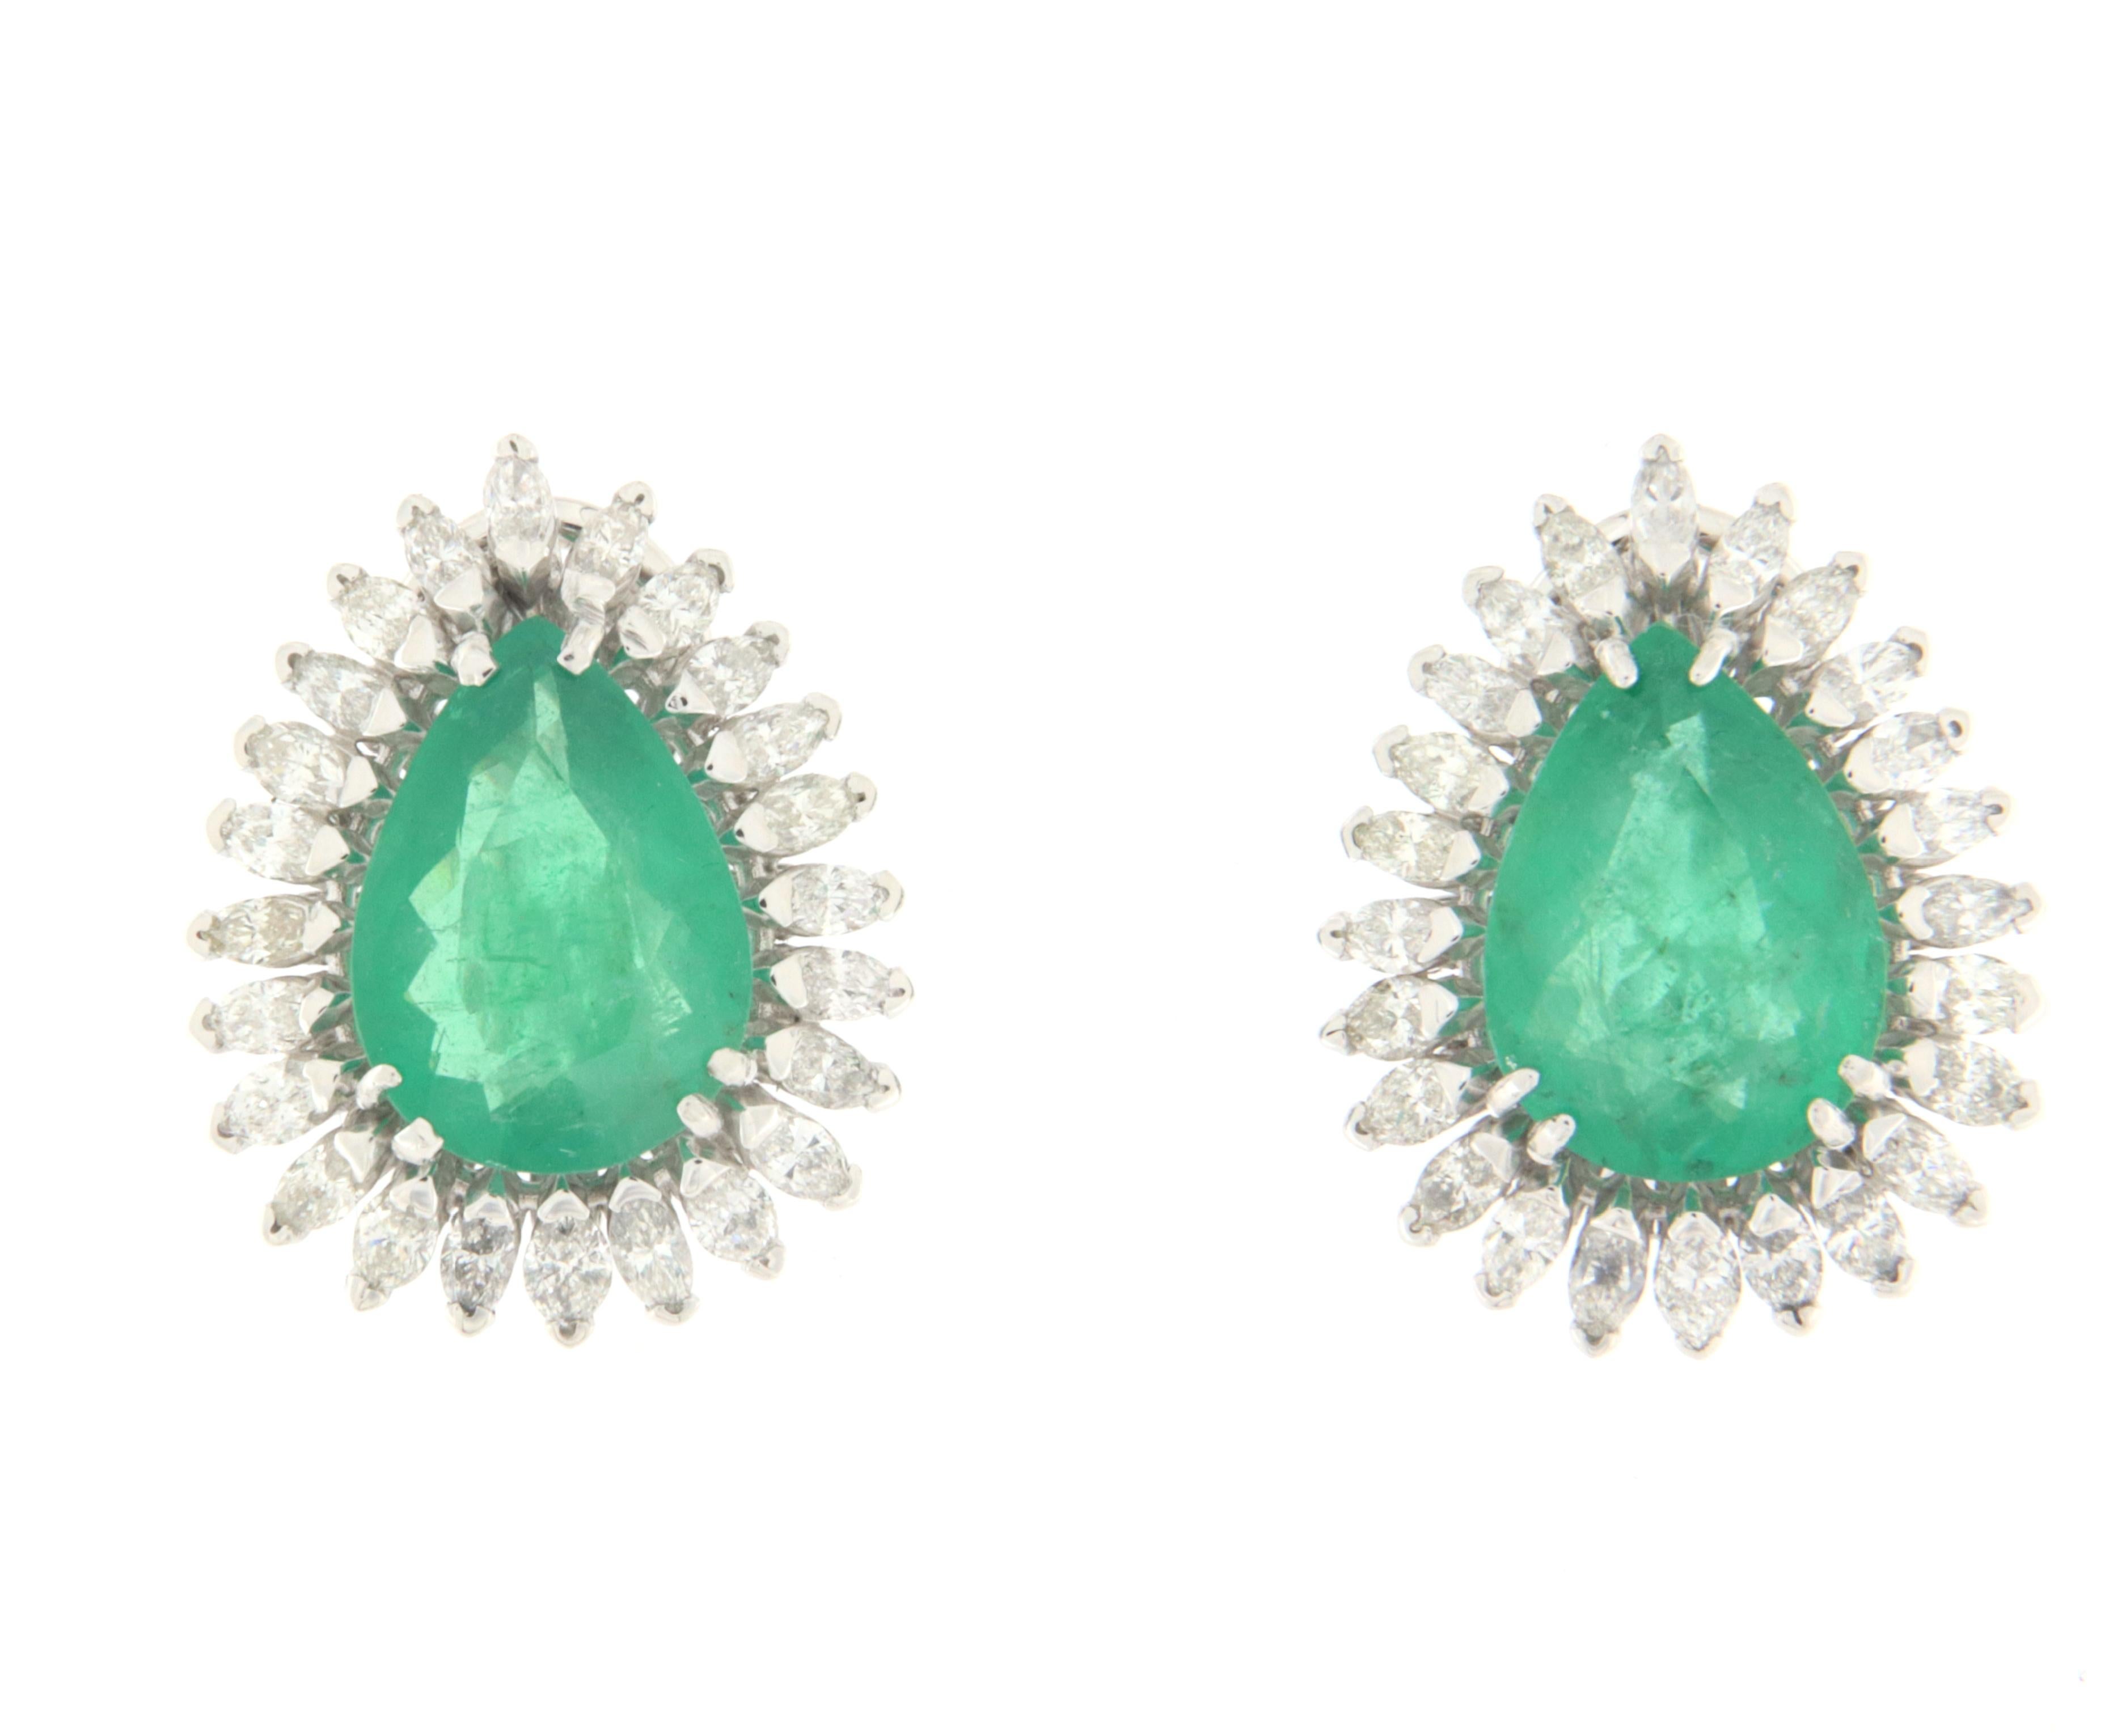 Spectacular earring made entirely by hand by expert goldsmiths and Neapolitan setters.
The earring is made of 18 carat white gold and present two drop emeralds surrounded and supported by natural diamonds.
A classic and one-of-a-kind earring, for